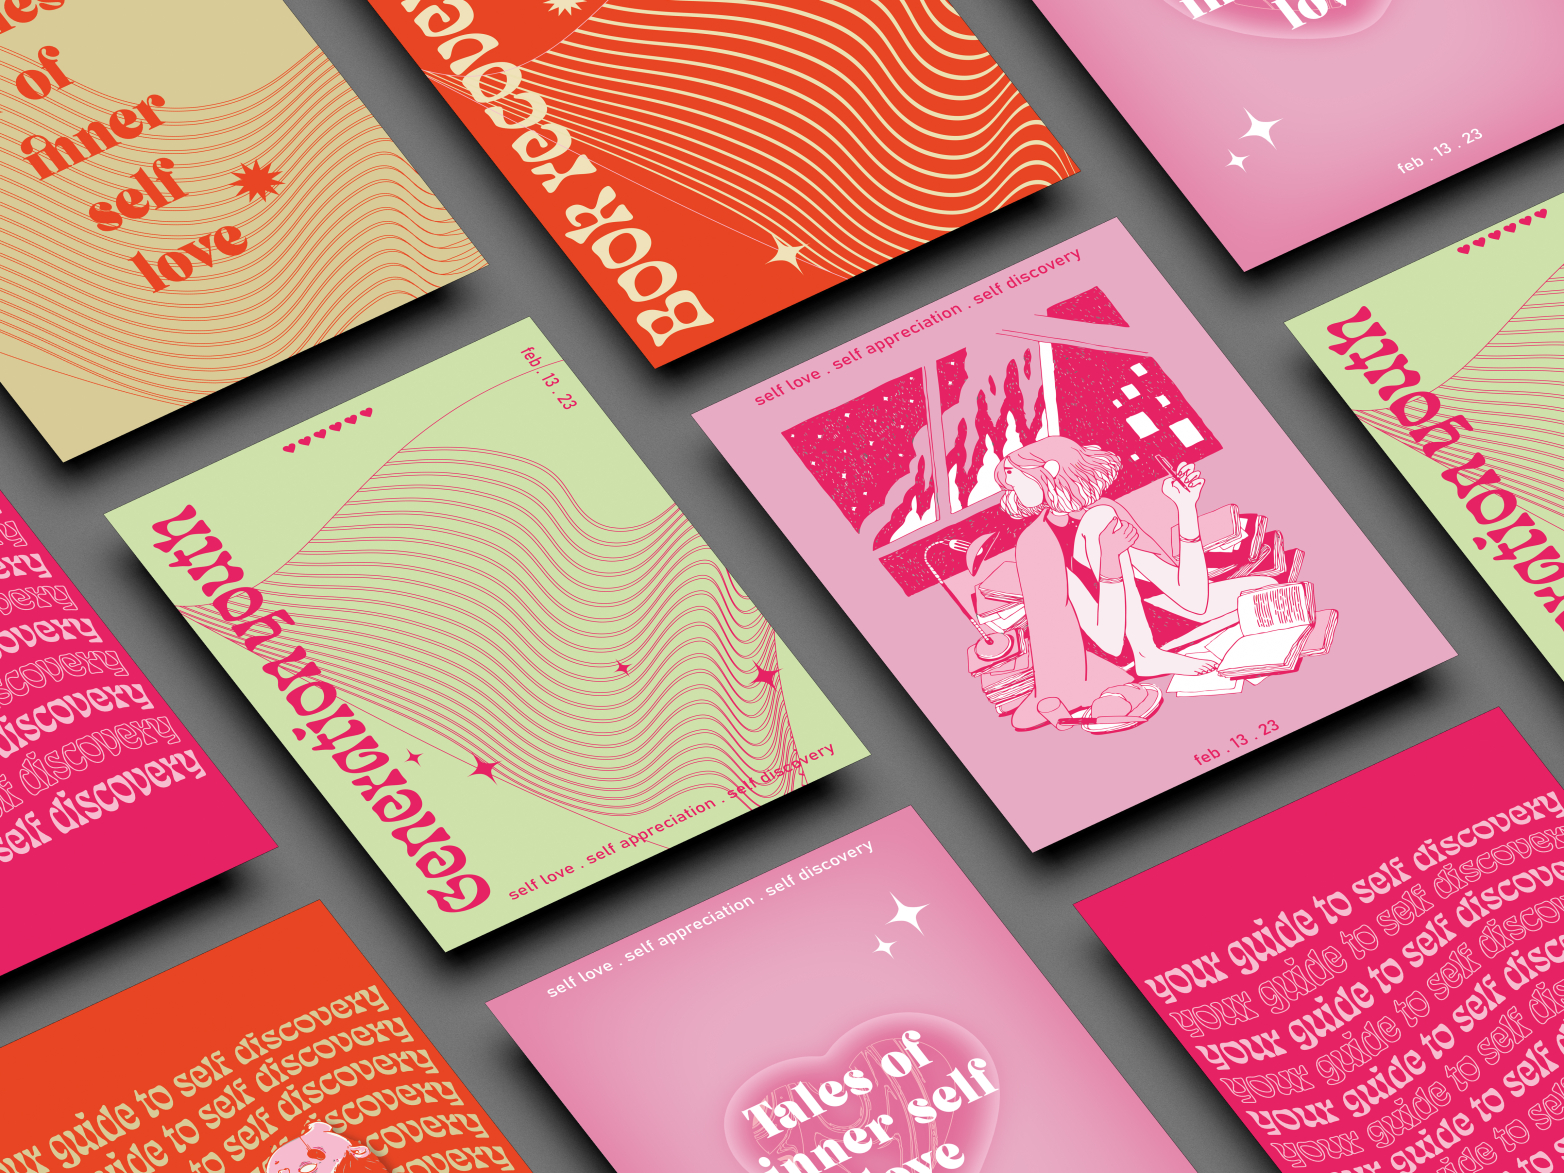 Posters by Hanine Noomene on Dribbble